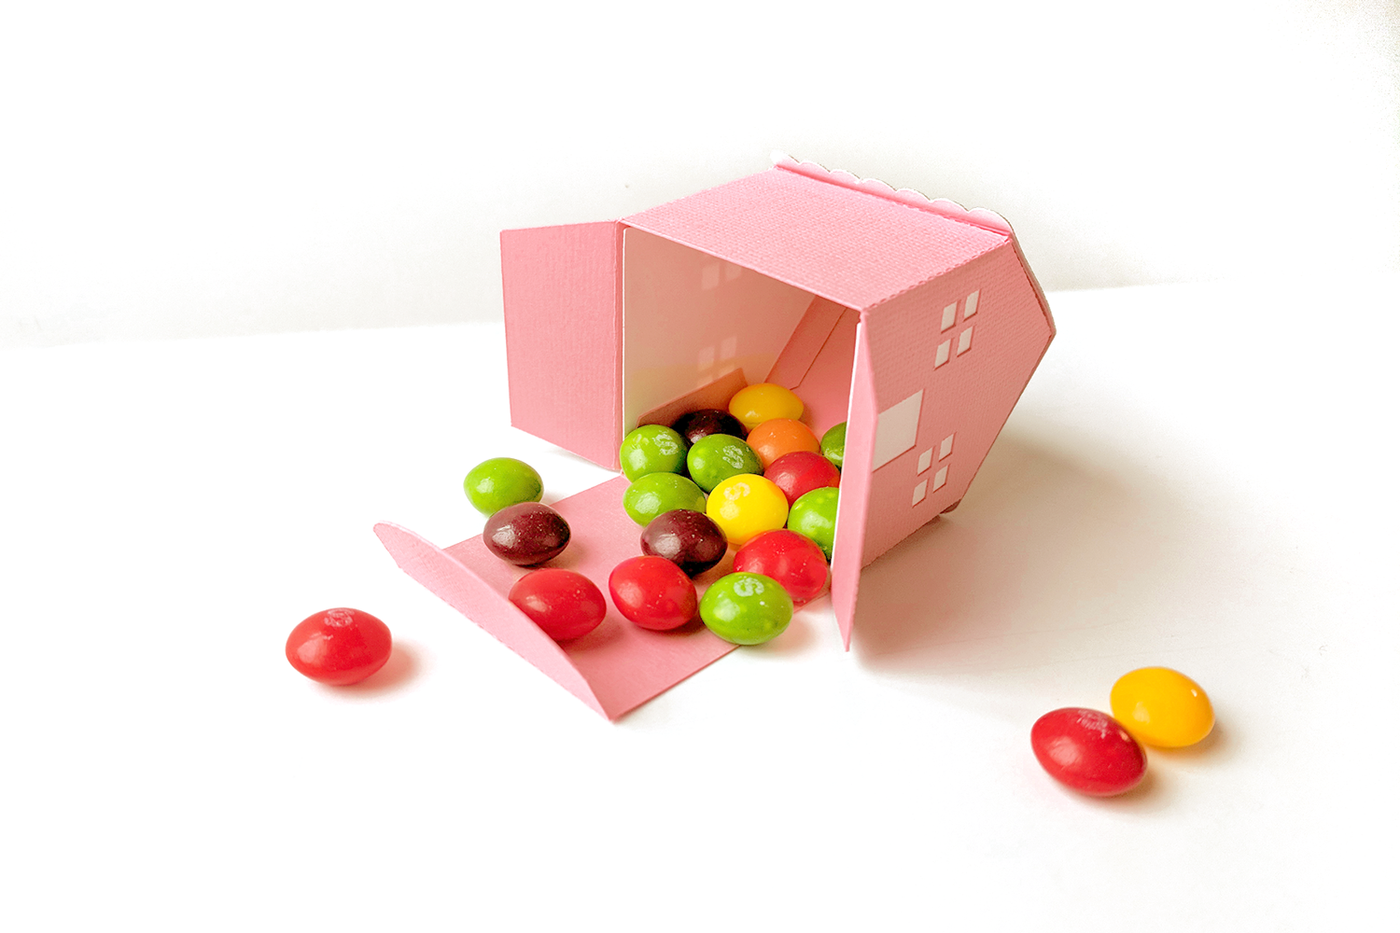 A 3D house box made of pink paper. The bottom of the box is open and spilling out Skittles candies.